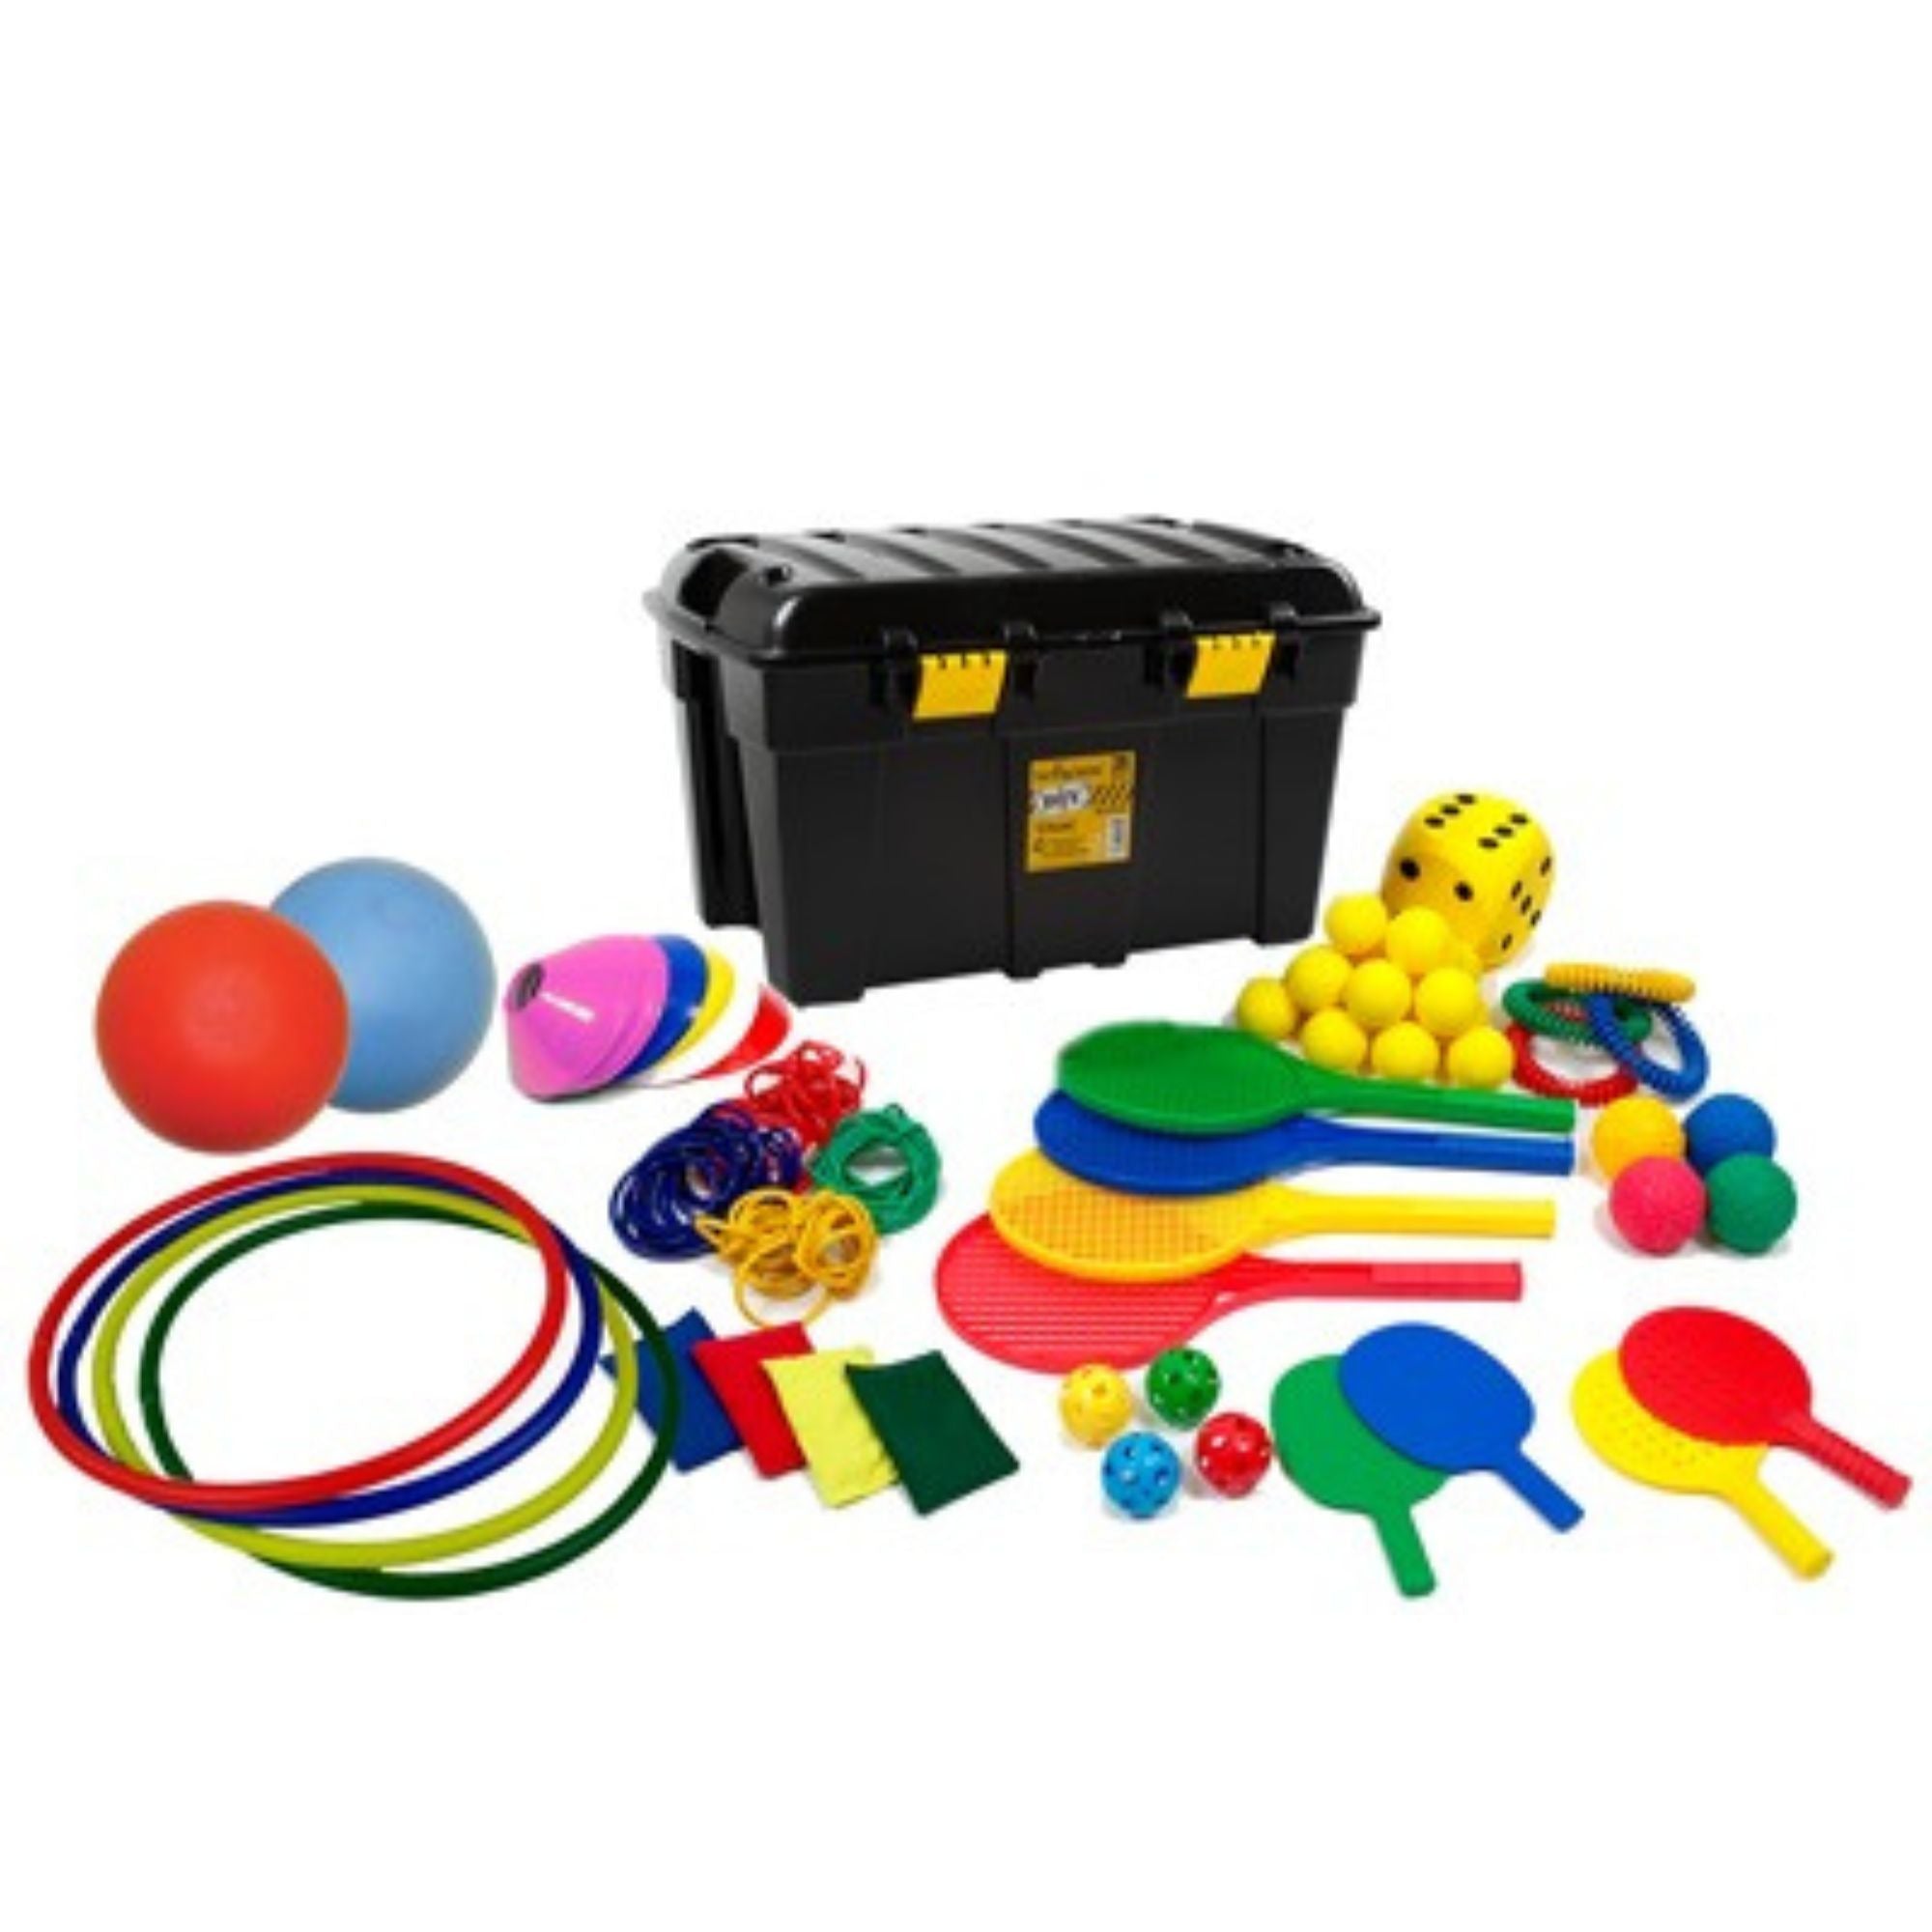 GetSetGo with Playtime Pack E, The GetSetGo with Playtime Pack E is a comprehensive set designed to provide a well-rounded physical activity experience for children. This all-inclusive pack features a wide array of equipment geared towards enhancing not just physical skills but also social skills like teamwork and collaboration. Components and Their Benefits: Skills Development 4 Bean Bags: Perfect for toss and catch games, helps with hand-eye coordination. 2 Foam Sponge Balls (20cm): Larger, softer balls s